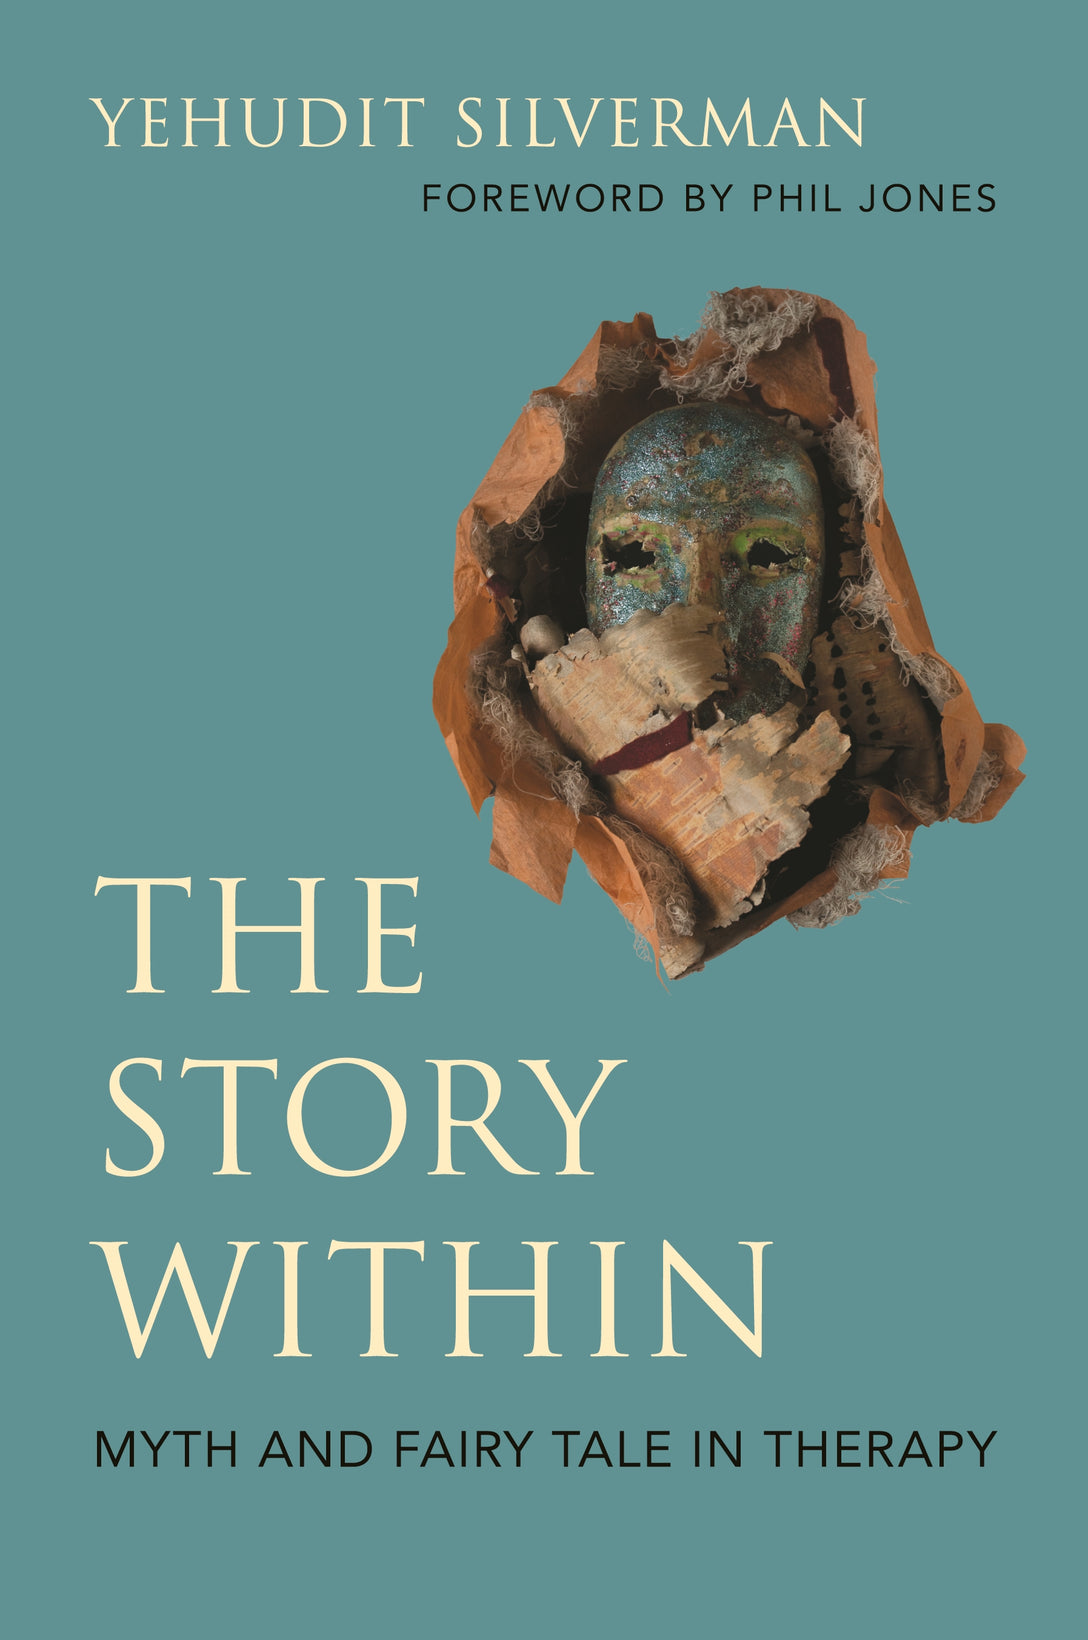 The Story Within - Myth and Fairy Tale in Therapy by Yehudit Silverman, Phil Jones